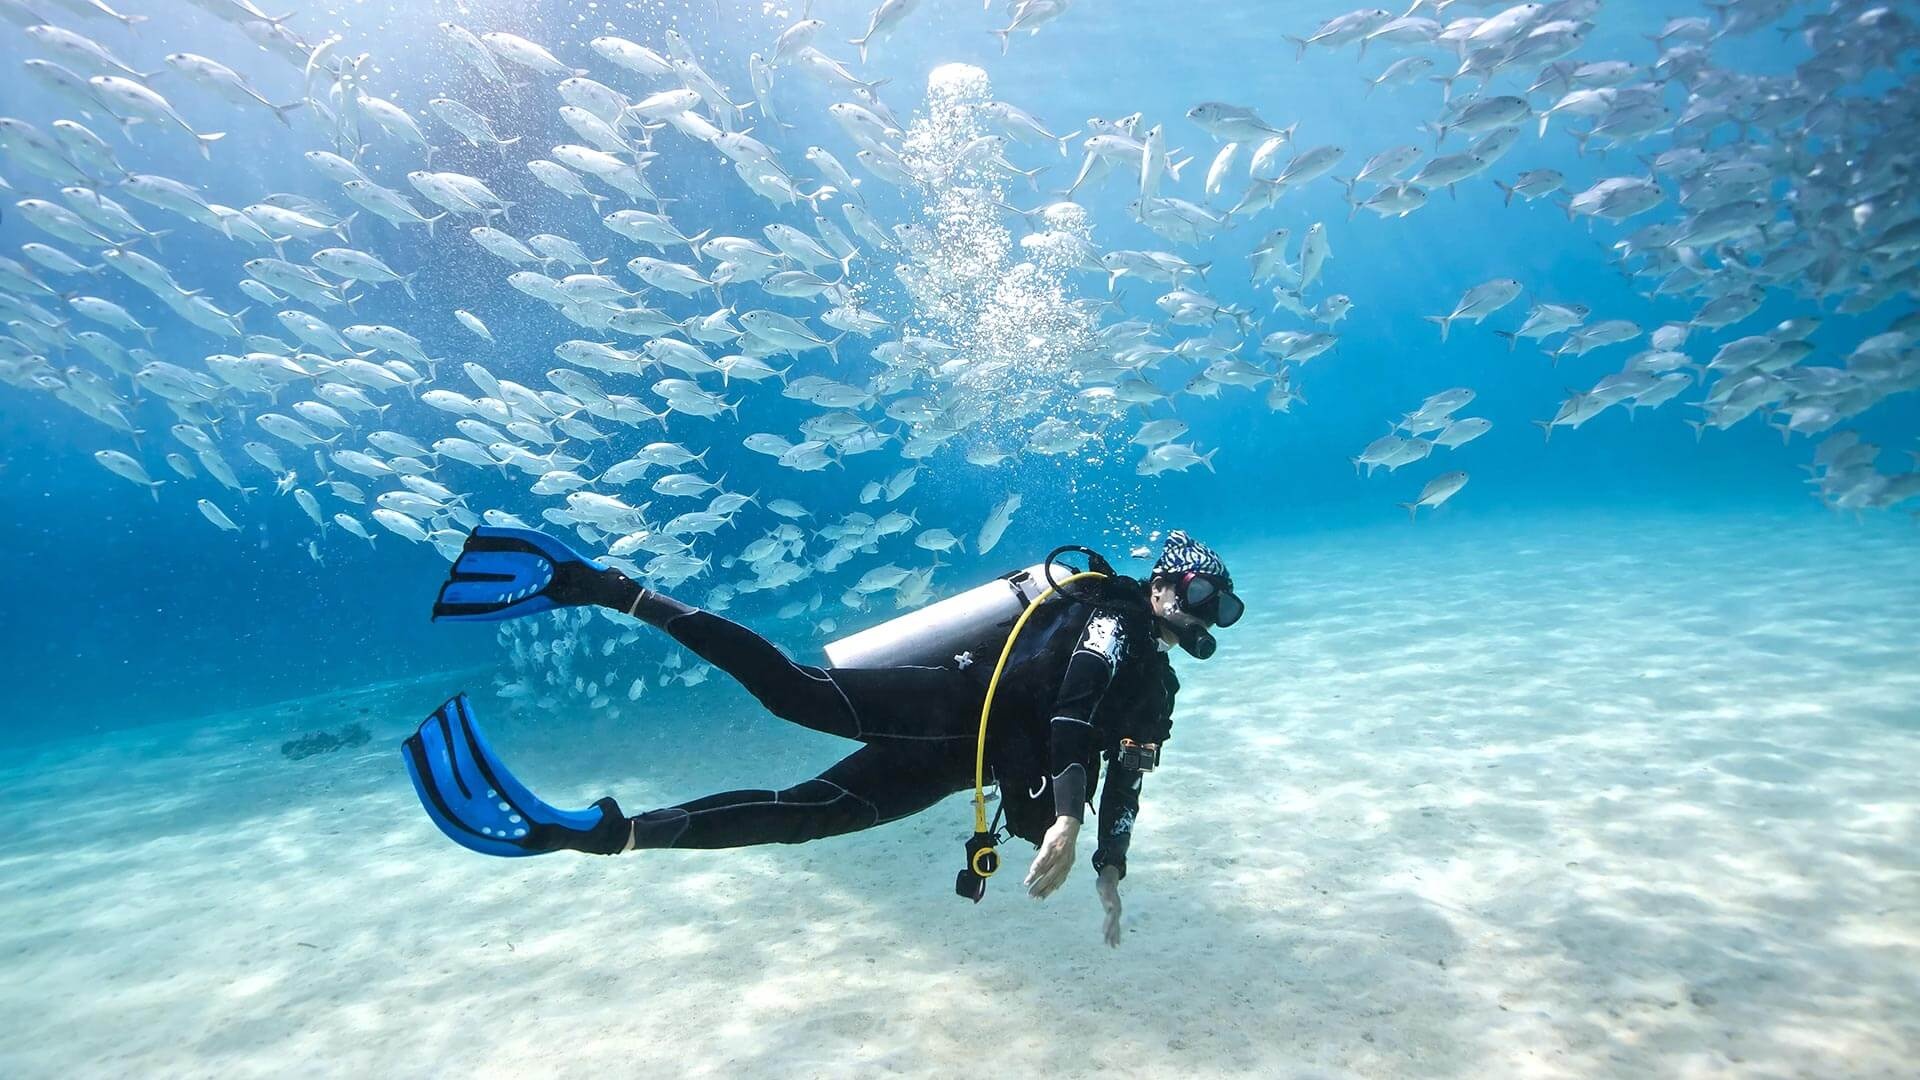 Scuba Diving: Recreational underwater activity, An extreme sport with an opportunity to explore. 1920x1080 Full HD Background.